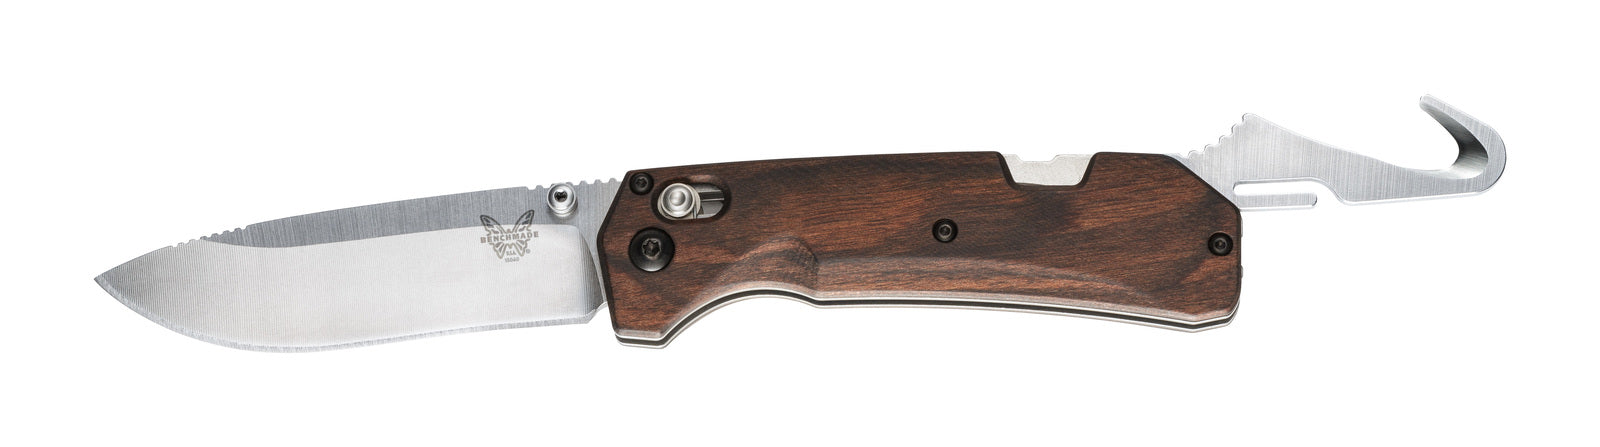 Benchmade 15060-2 Grizzly Creek Axis Folding Knife with Gut Hook and Wood Handle - Wander Outdoors